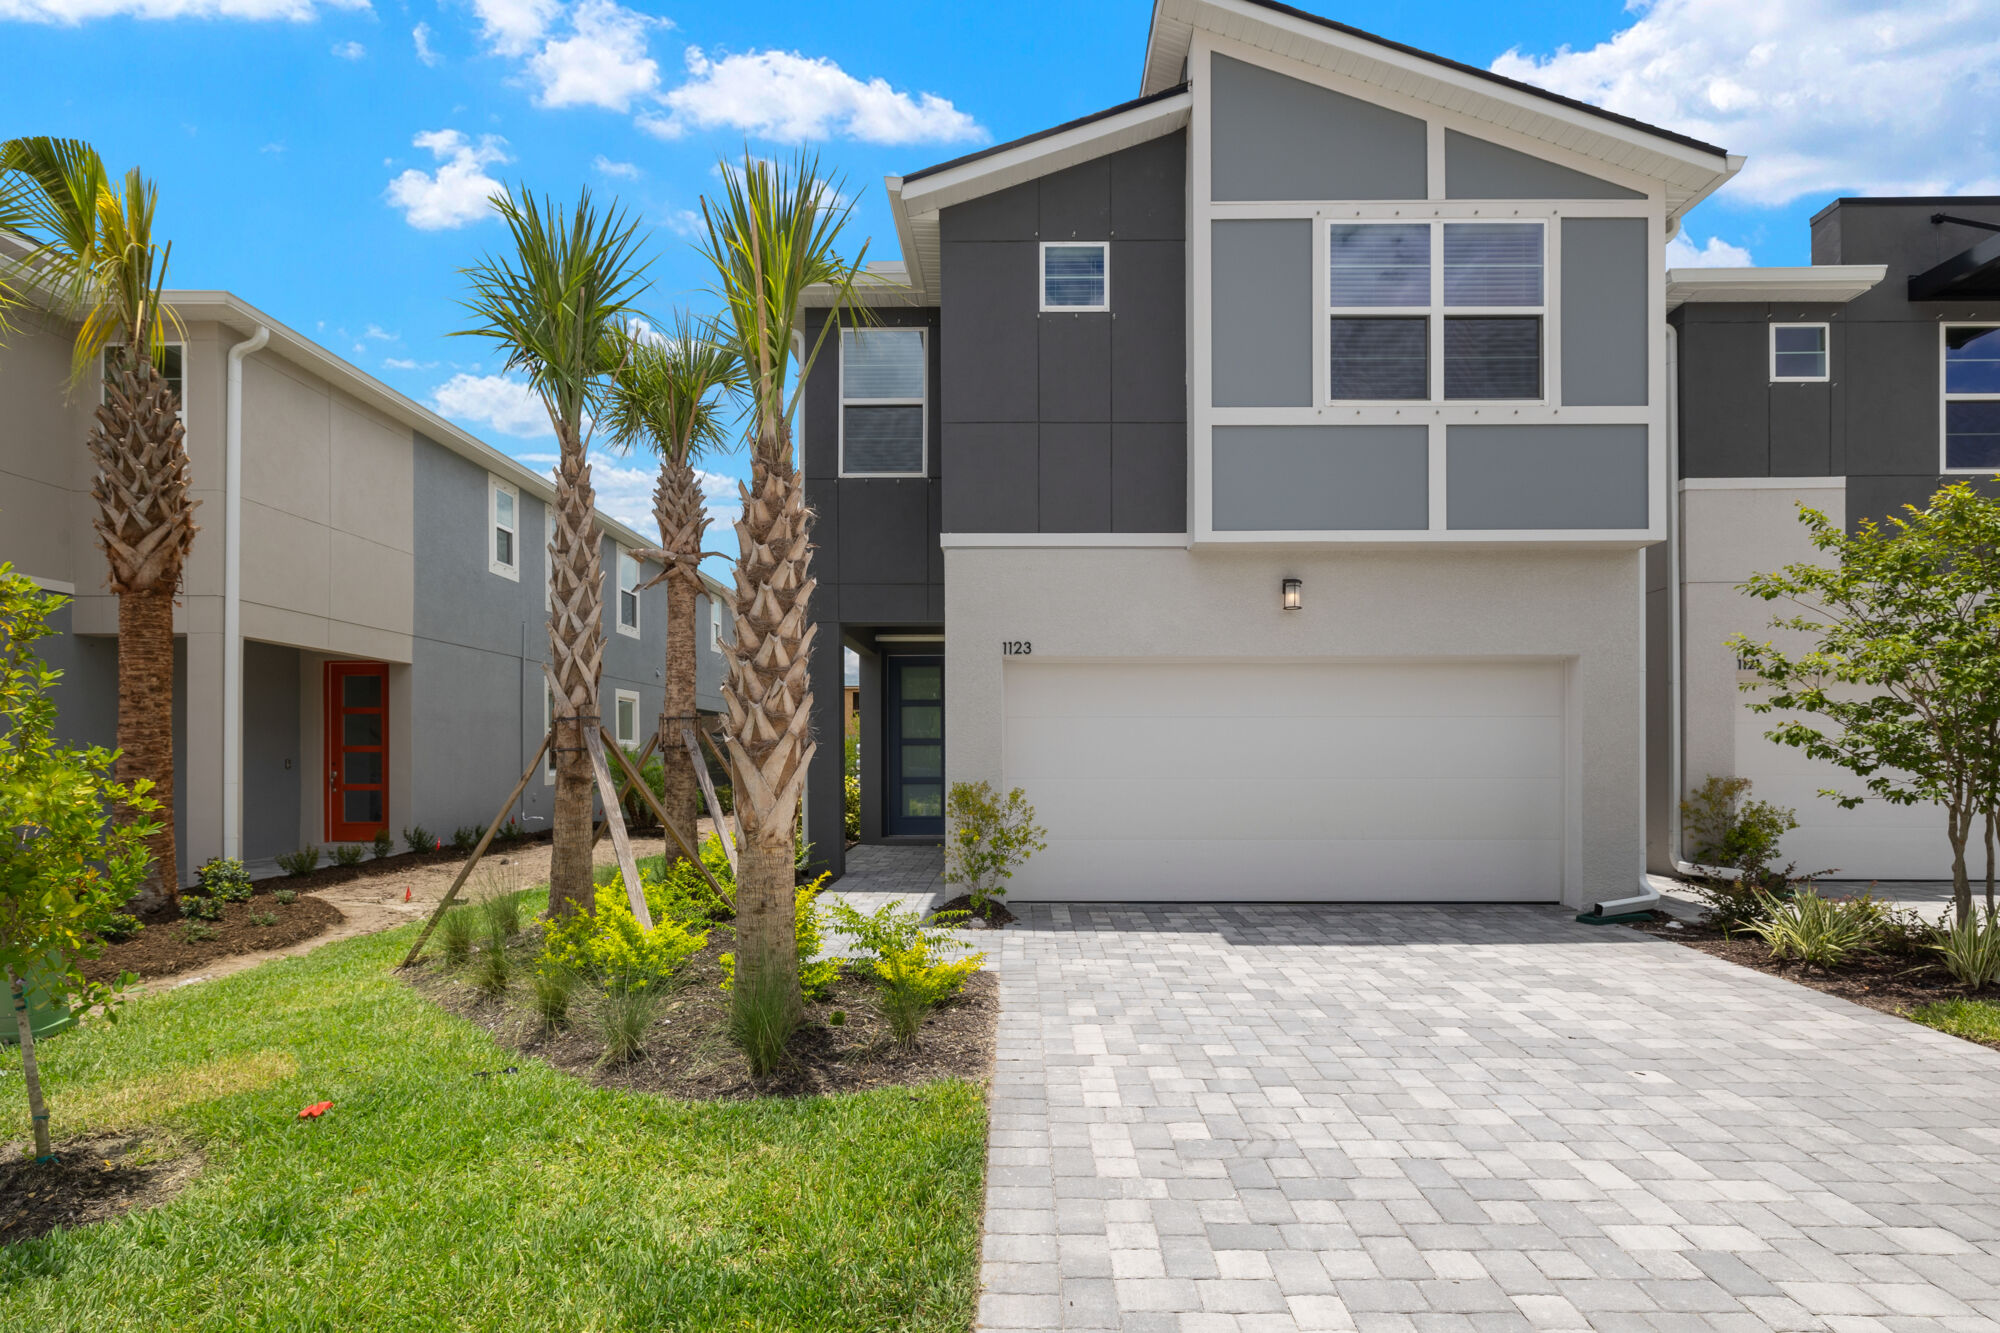 2 story town home, 4 bedrooms, 3 baths, loft, game room, bath oasis with soaking tub, separate shower in owners bathroom, walk-in closets, open concept plan, full bedroom and bathroom on main floor, covered lanai, 